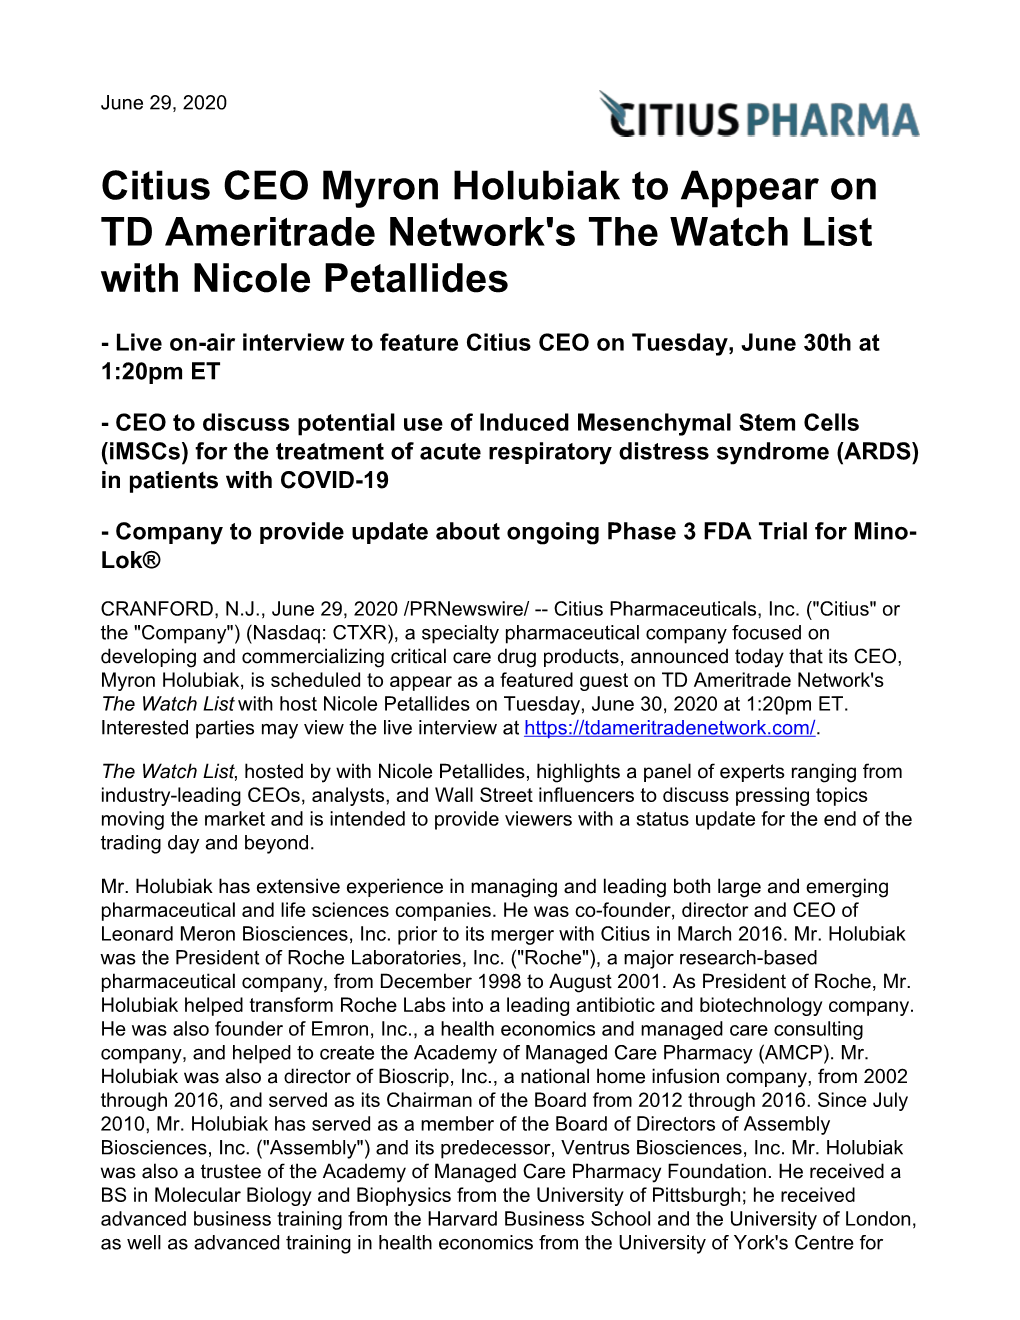 Citius CEO Myron Holubiak to Appear on TD Ameritrade Network's the Watch List with Nicole Petallides